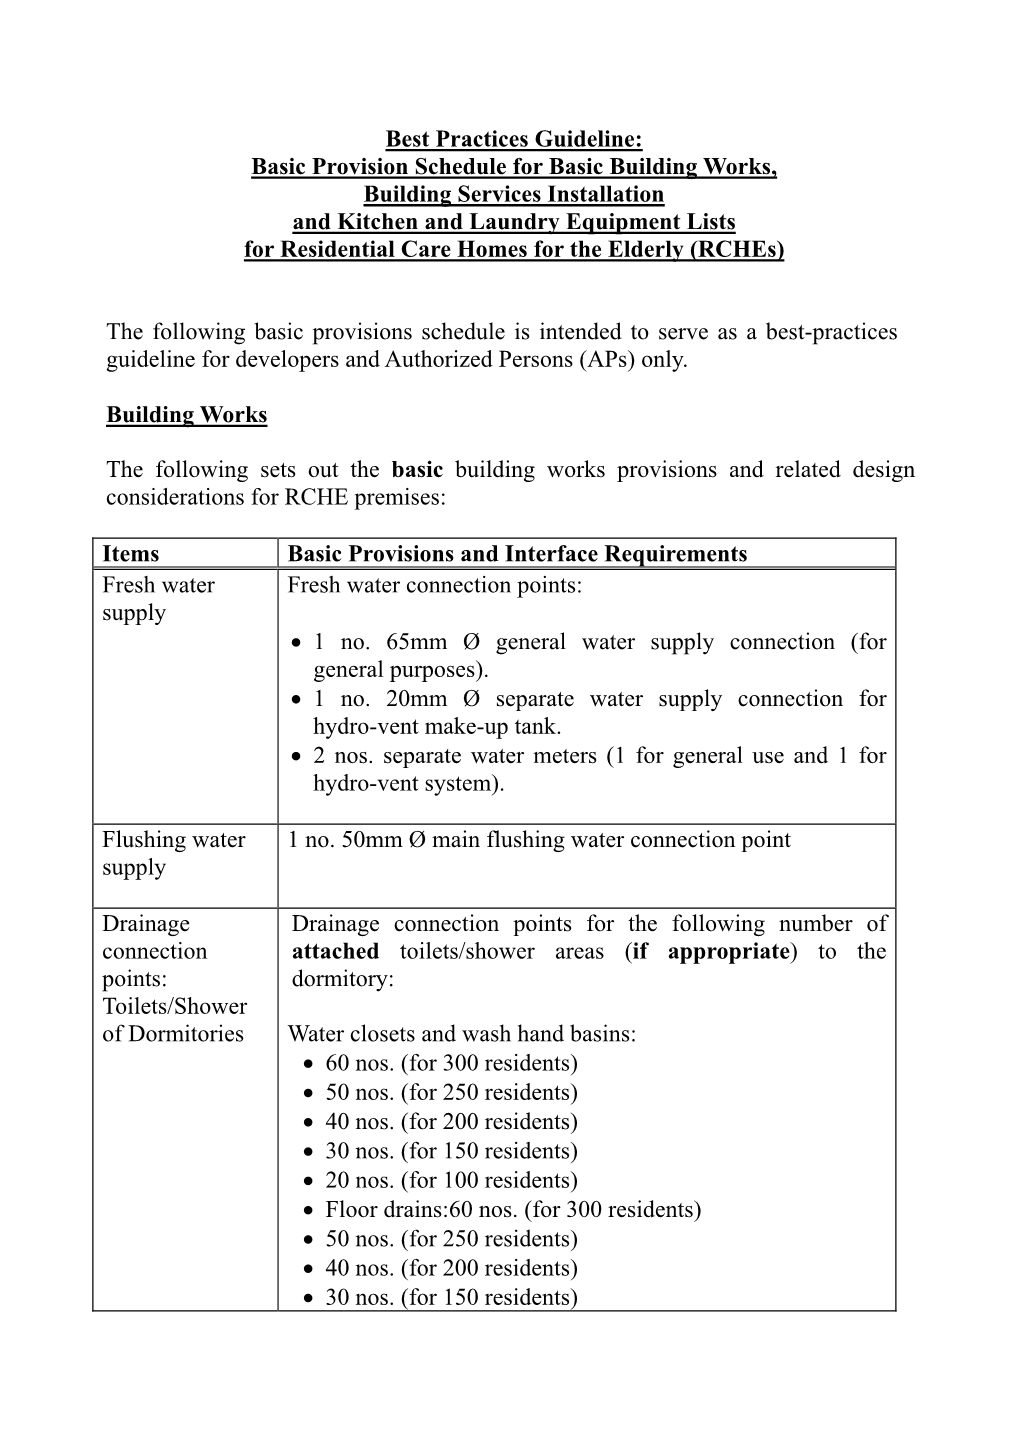 Basic Provision Schedule for Basic Building Works, Building Services